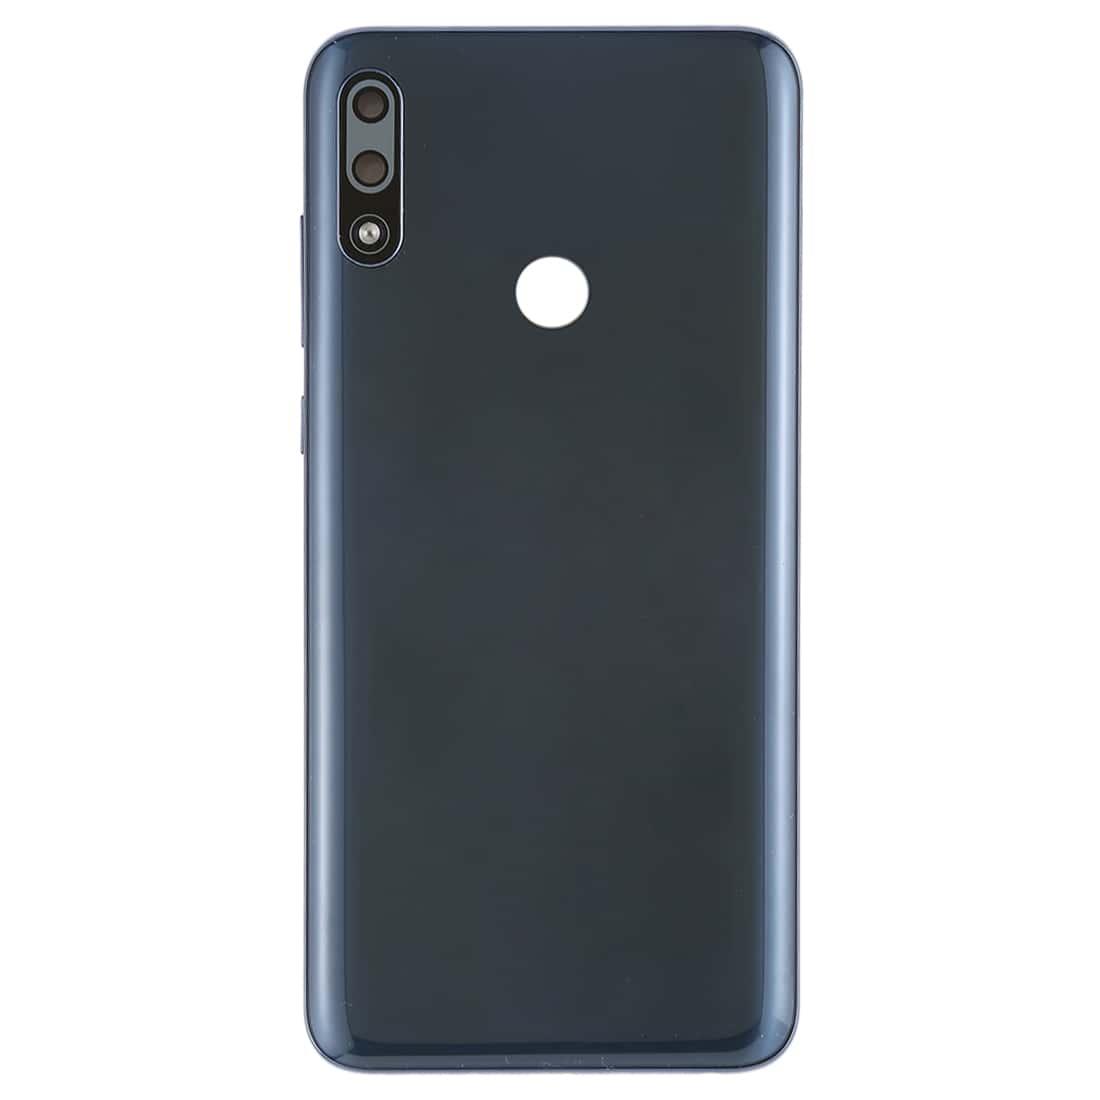 Back Glass Panel for Asus Zenfone Max Pro M2  Blue